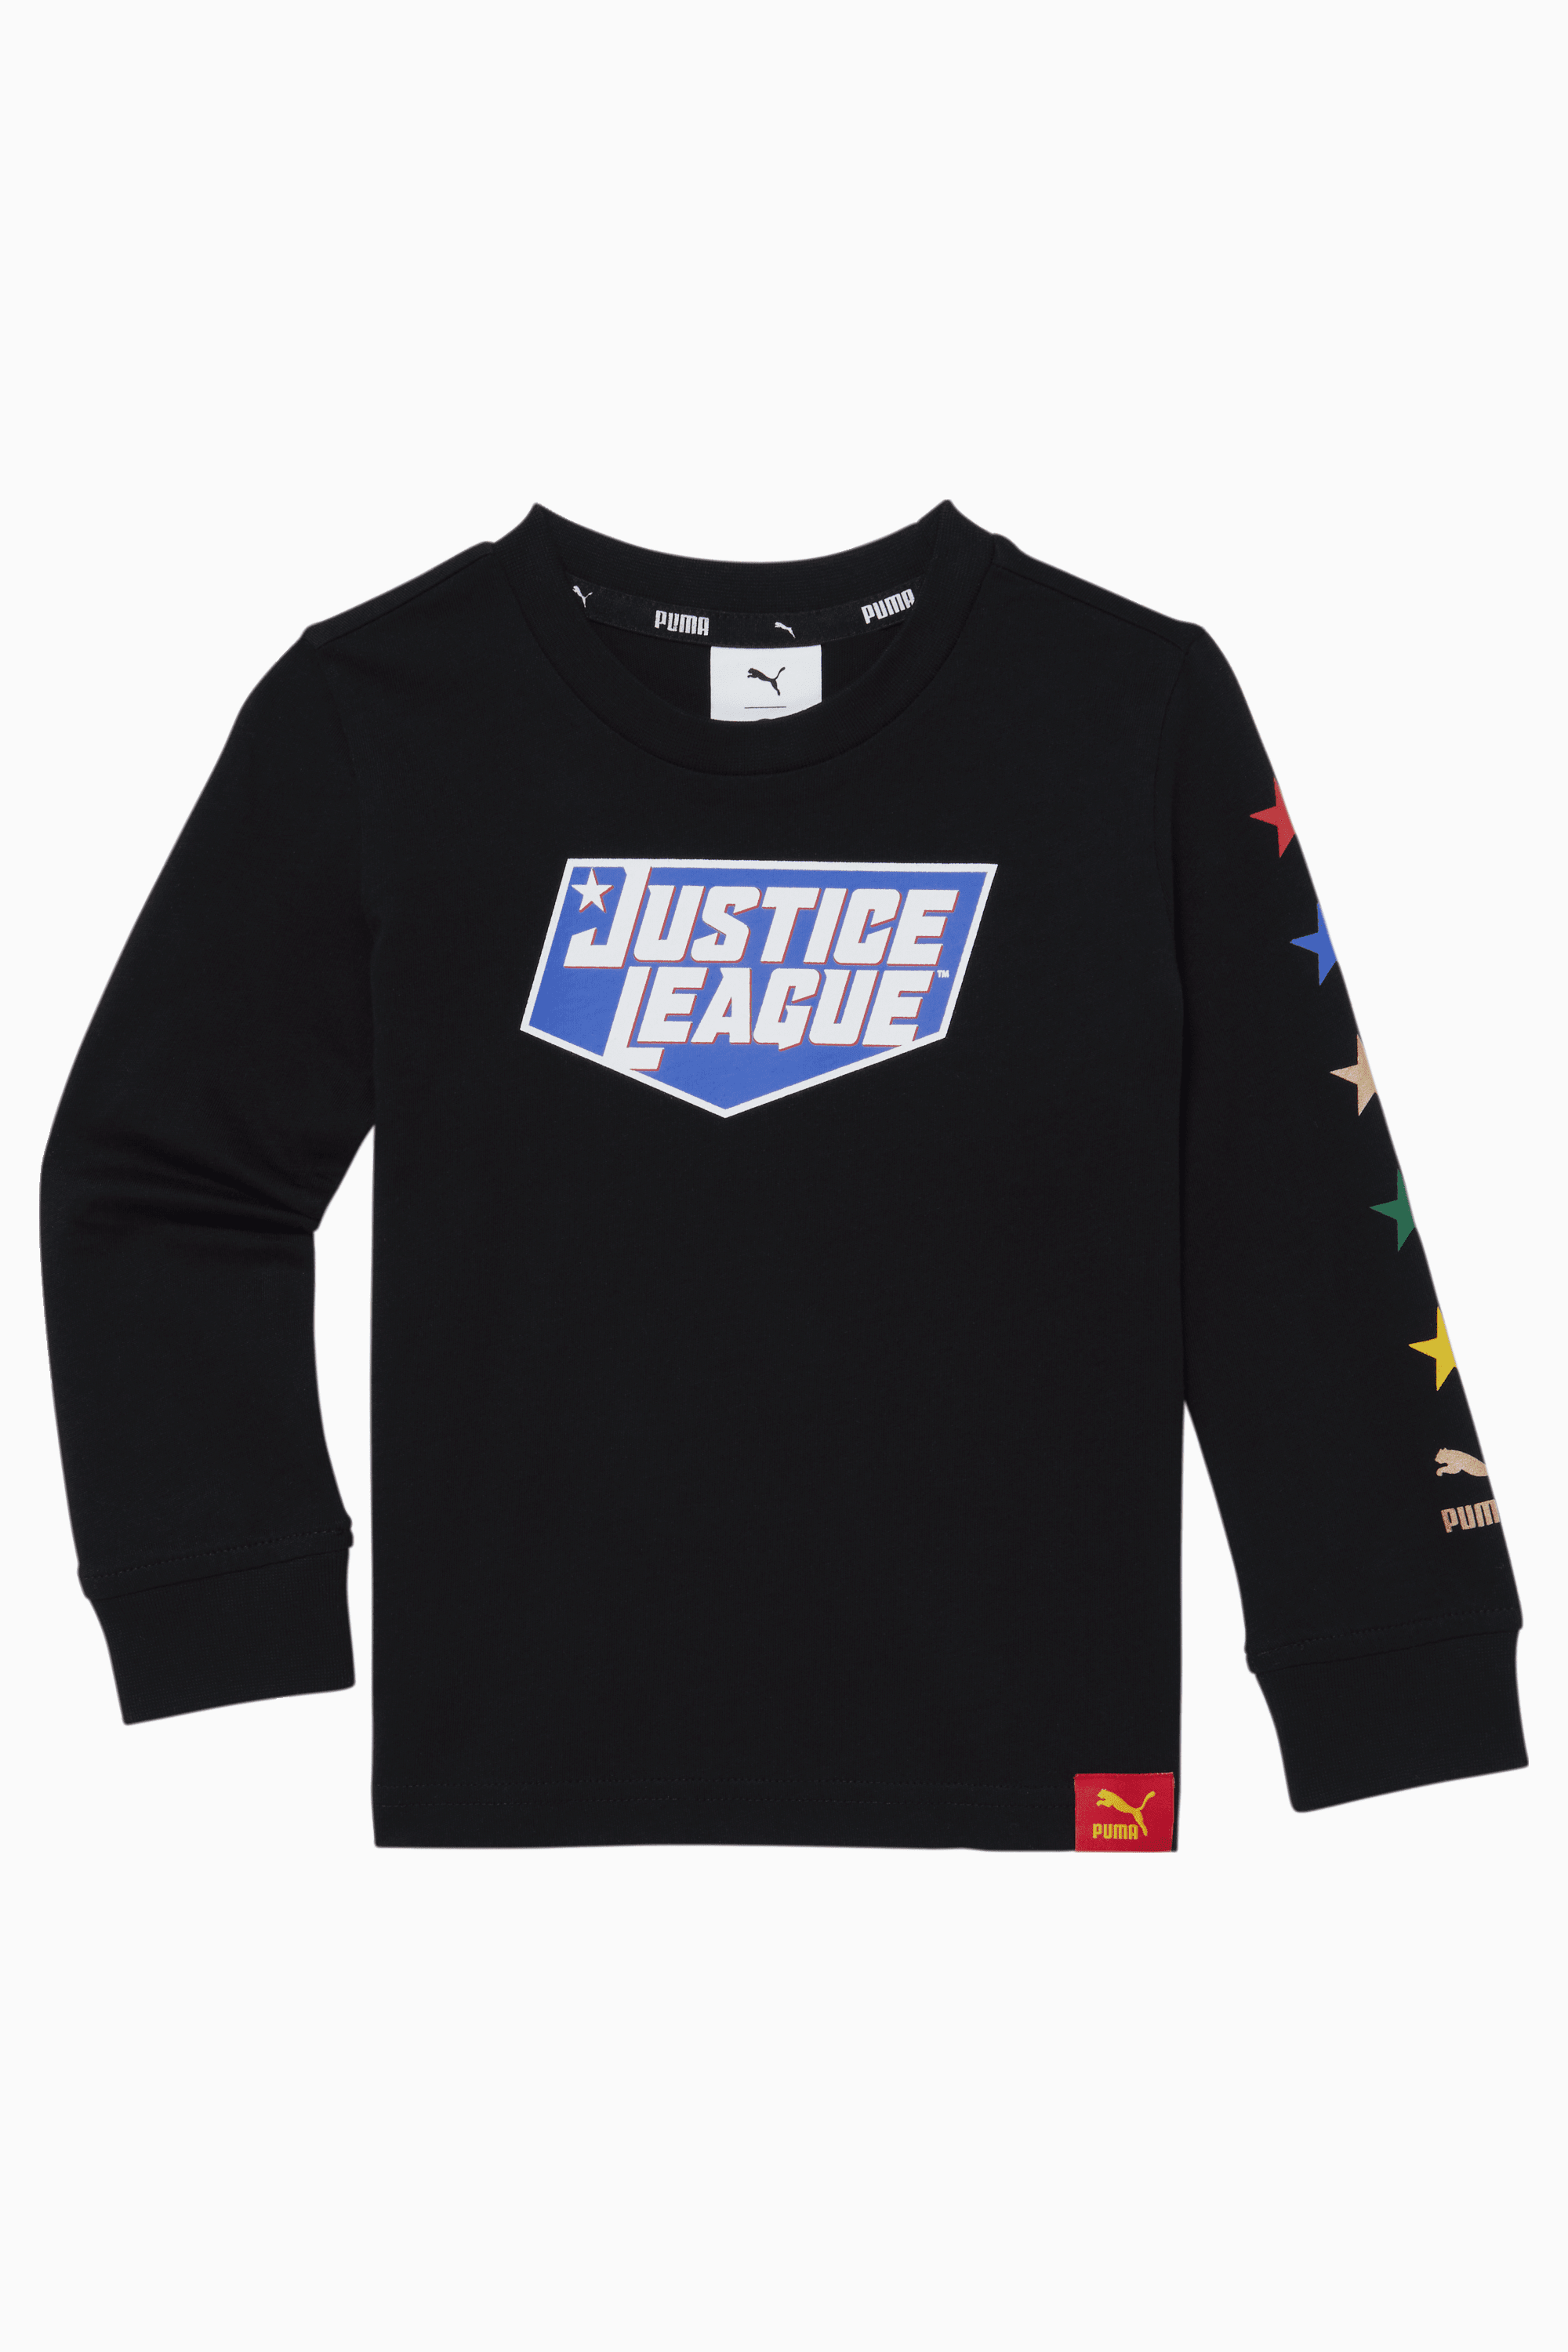 https://images.puma.com/image/upload/t_vertical_product/global/858529/01/fnd/PNA/fmt/png/PUMA-x-DC-Justice-League-Long-Sleeve-Toddler-Fashion-Tee